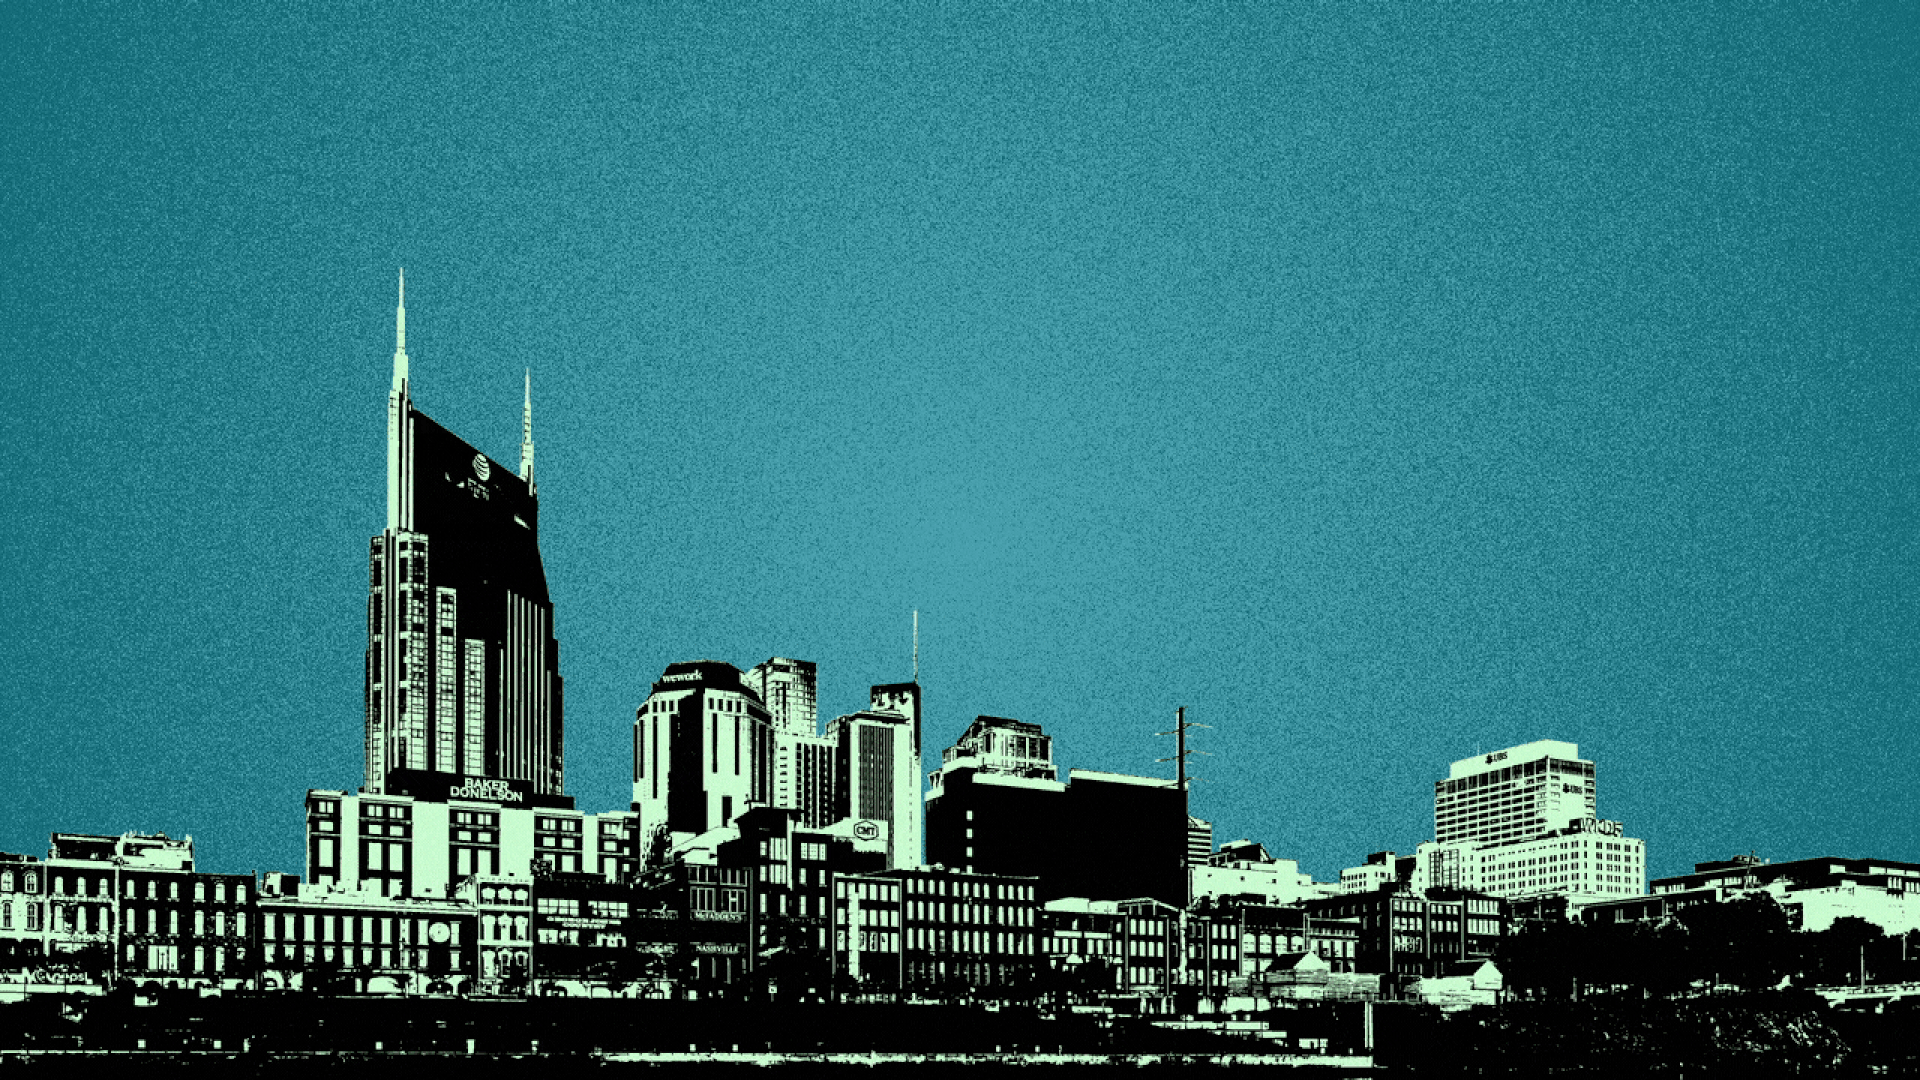 Illustration of the Nashville skyline with word balloons with exclamation points in them popping up over it from left to right.